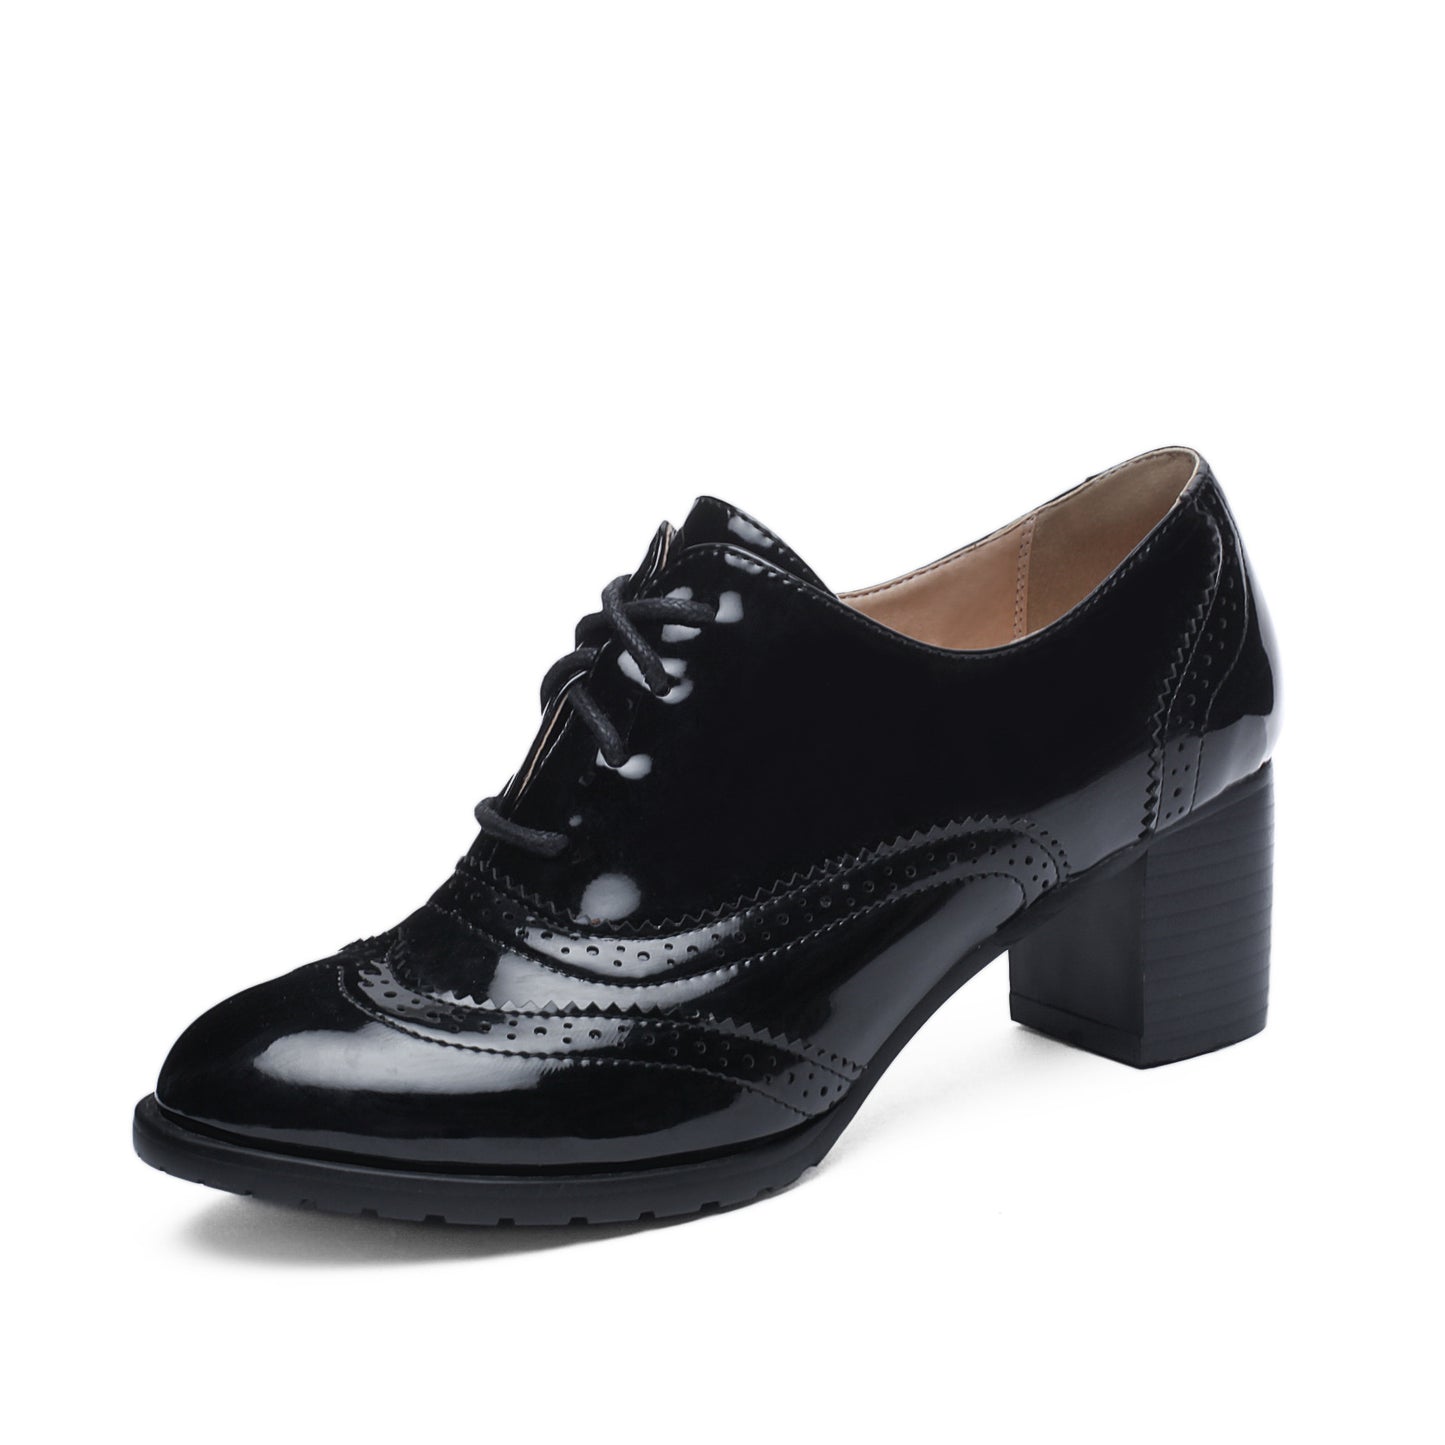 Lace Up Oxford Shoes Middle Heels for Women